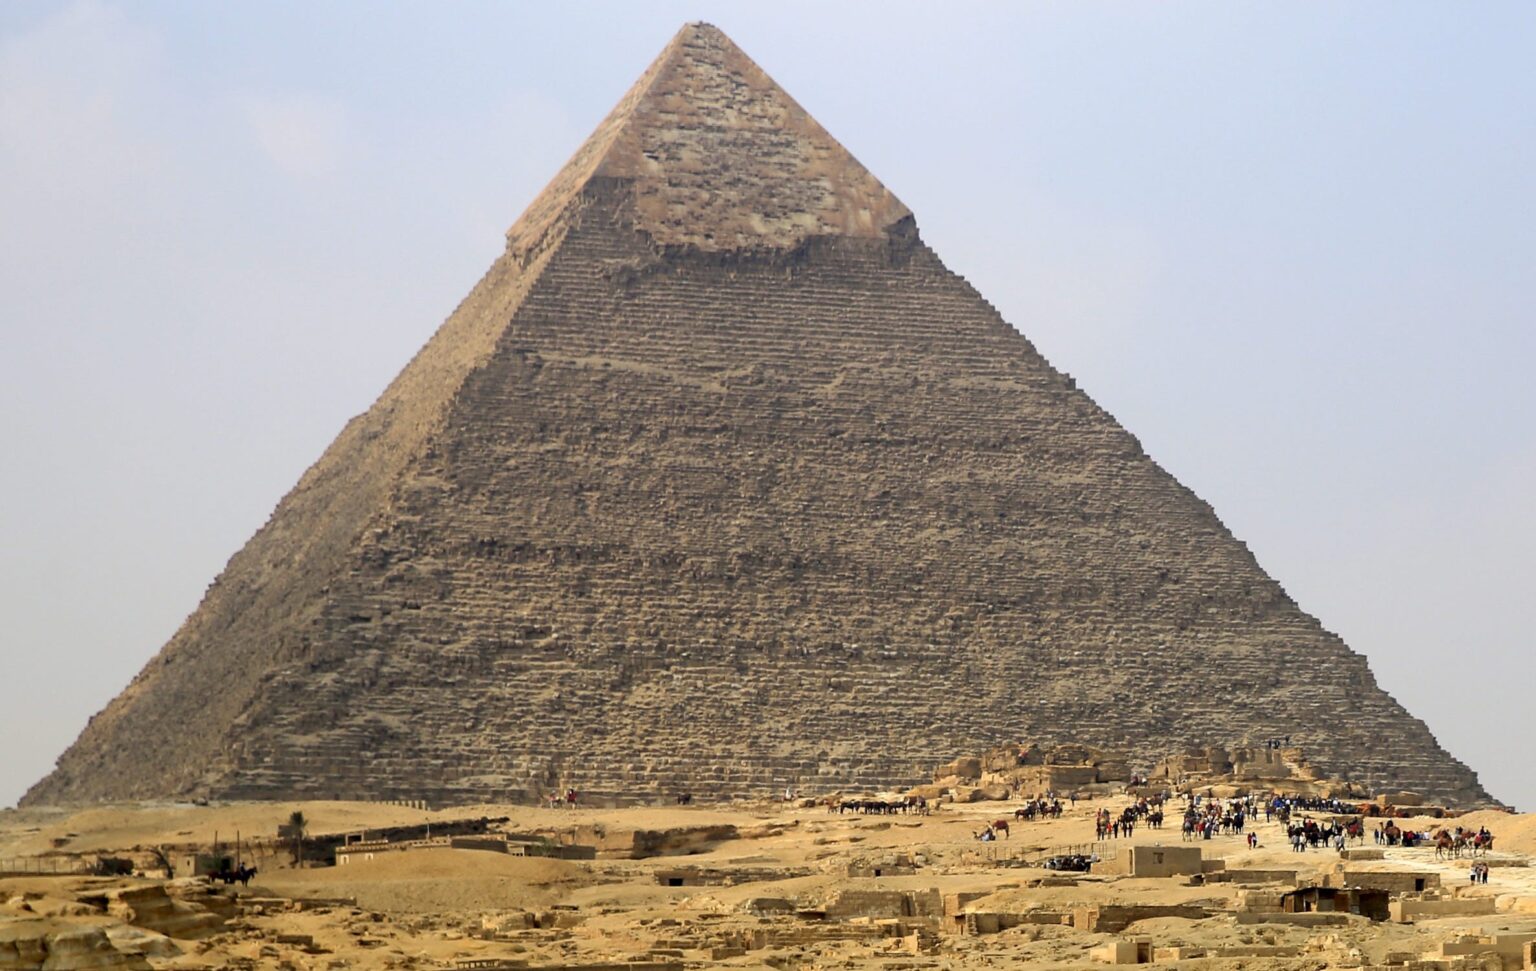 On Pluto you could throw a baseball over the Great Pyramid of Giza, a ...